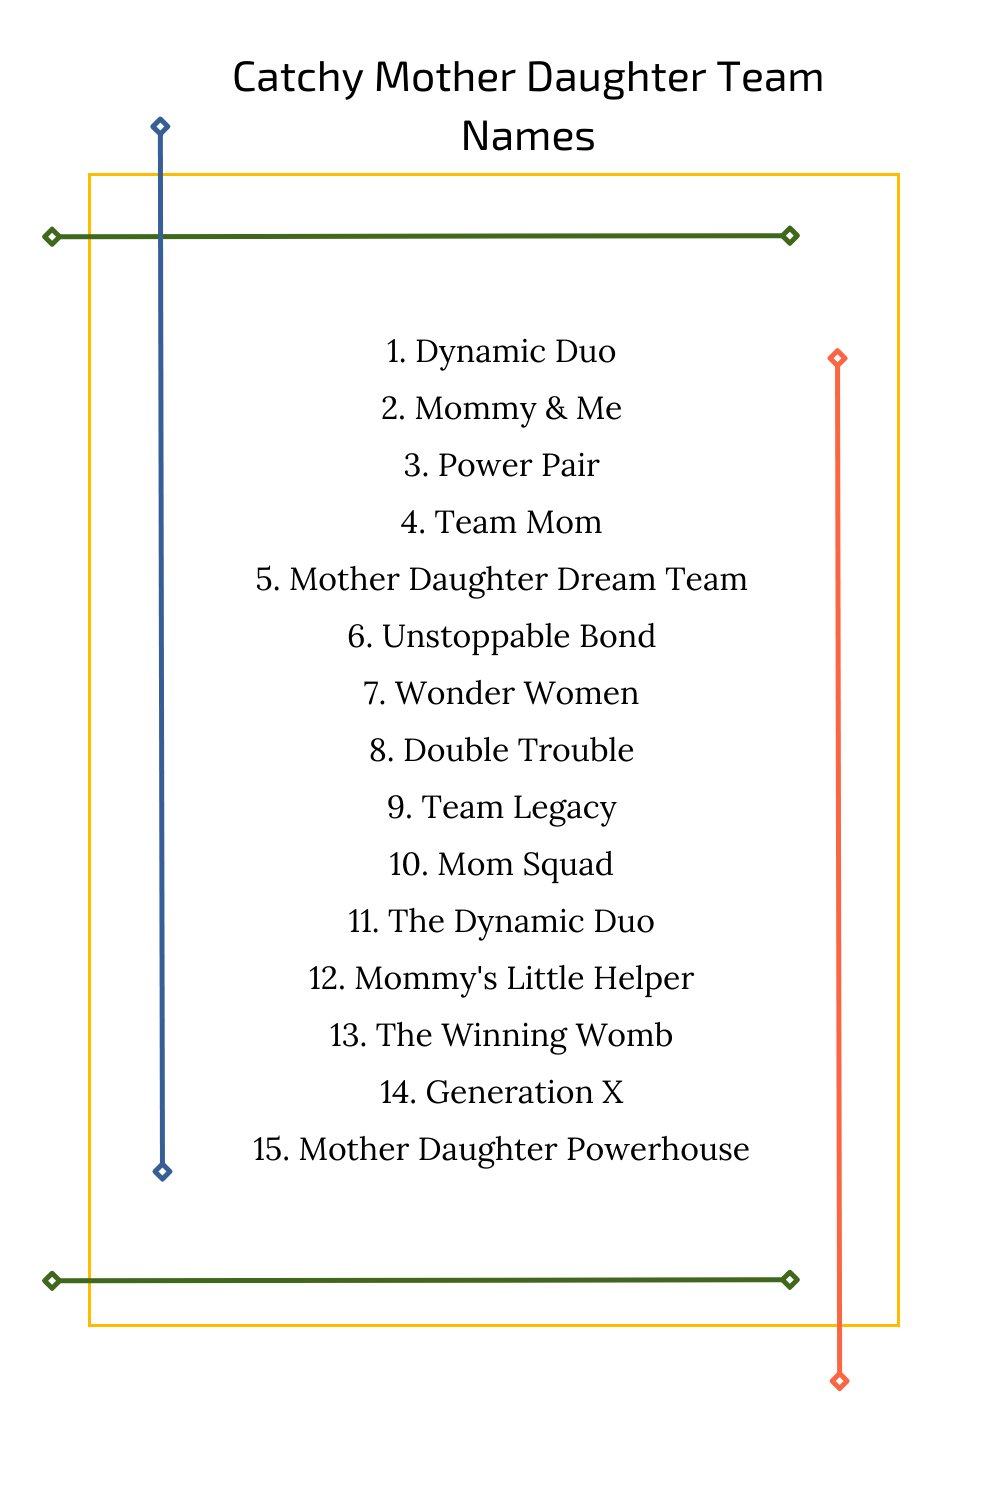 Catchy Mother Daughter Team Names